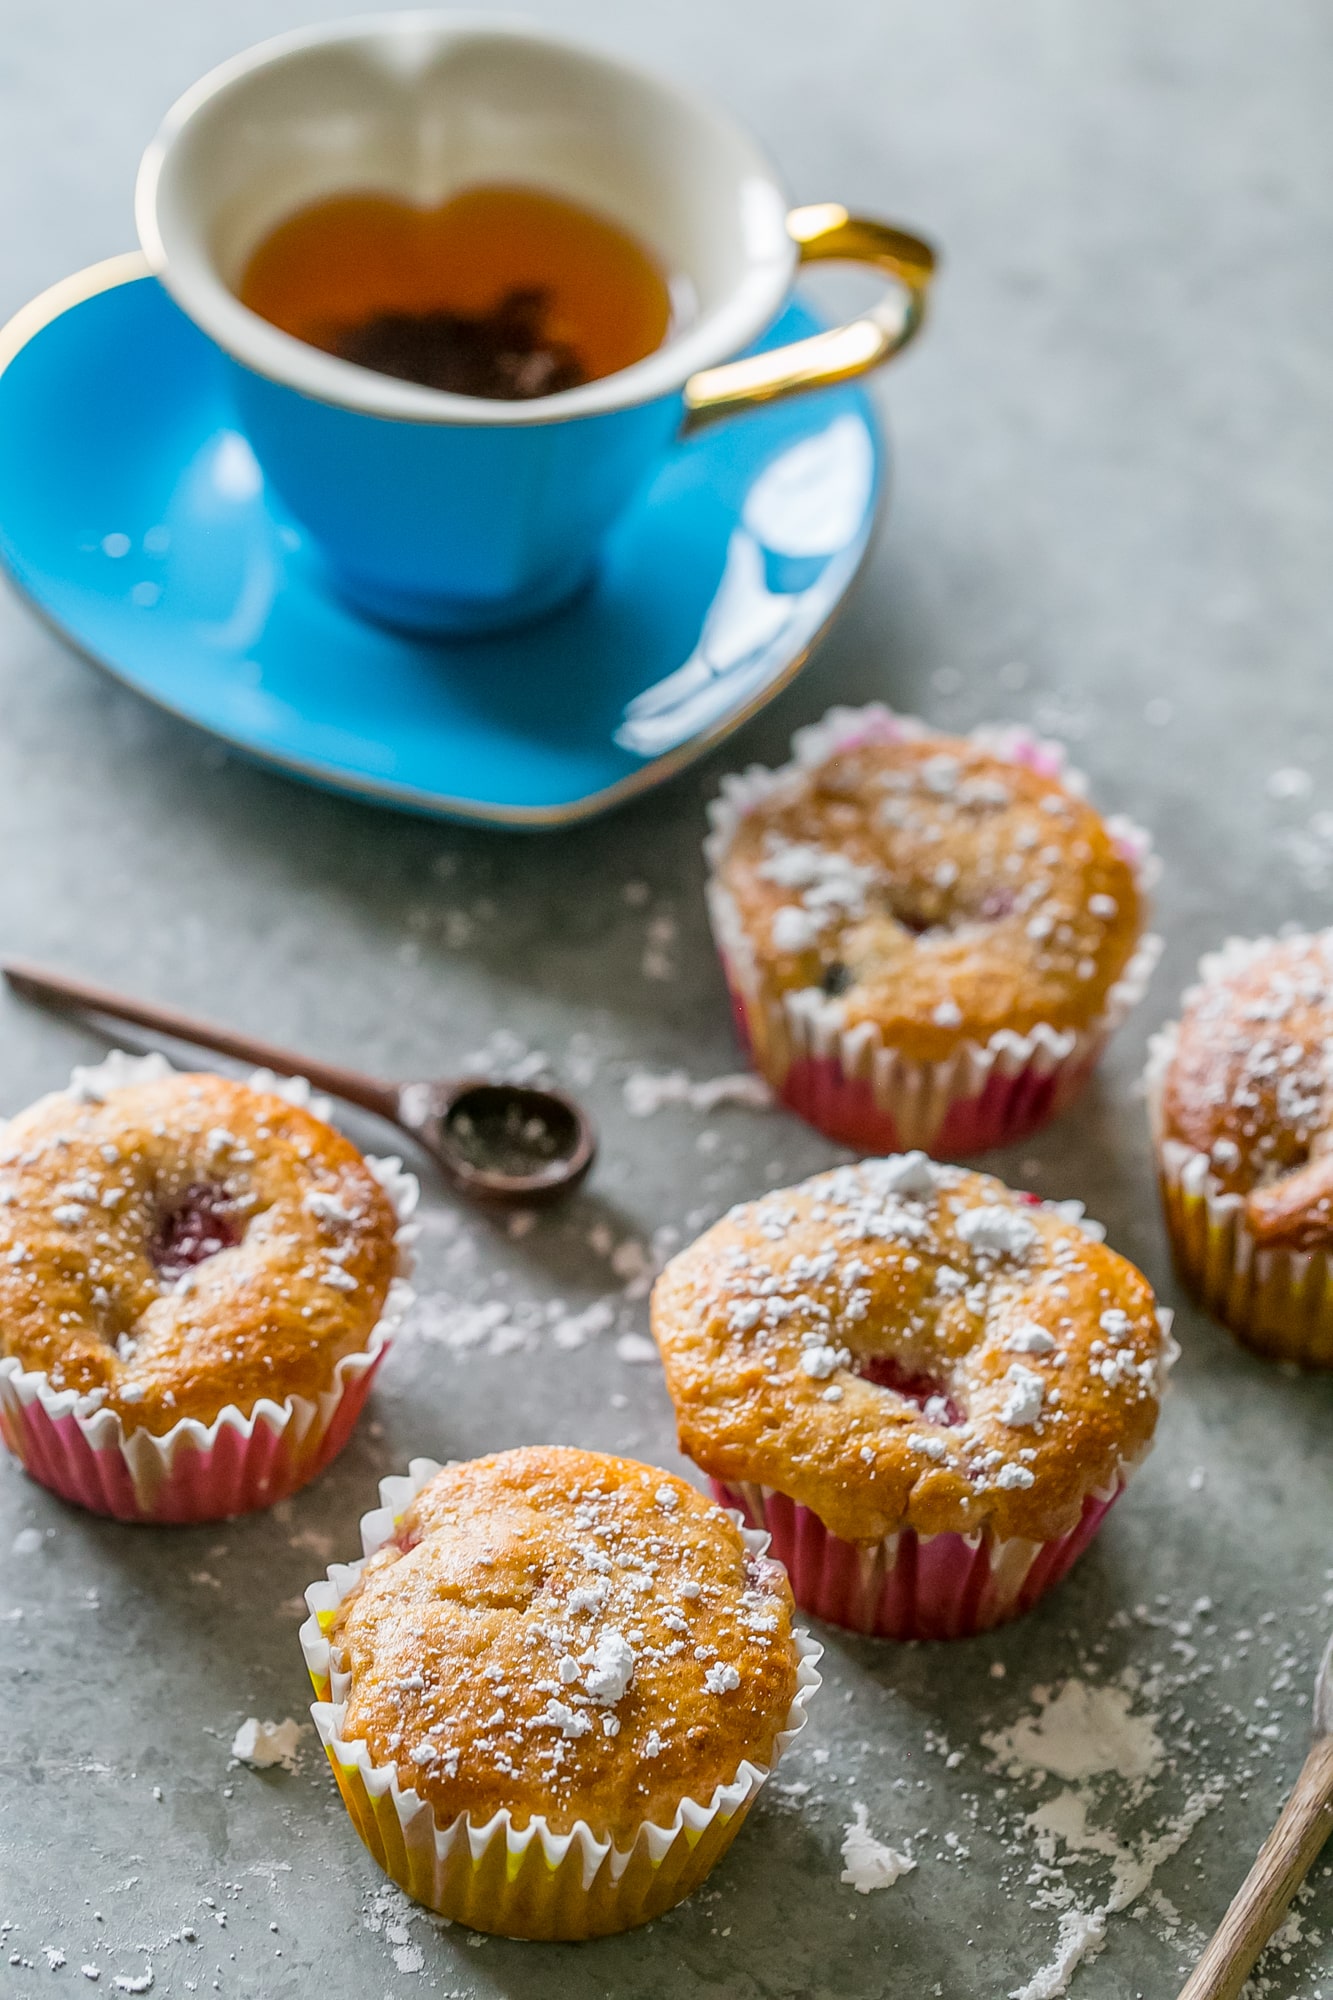 These cake mix muffins are so simple and delicious - yum! 